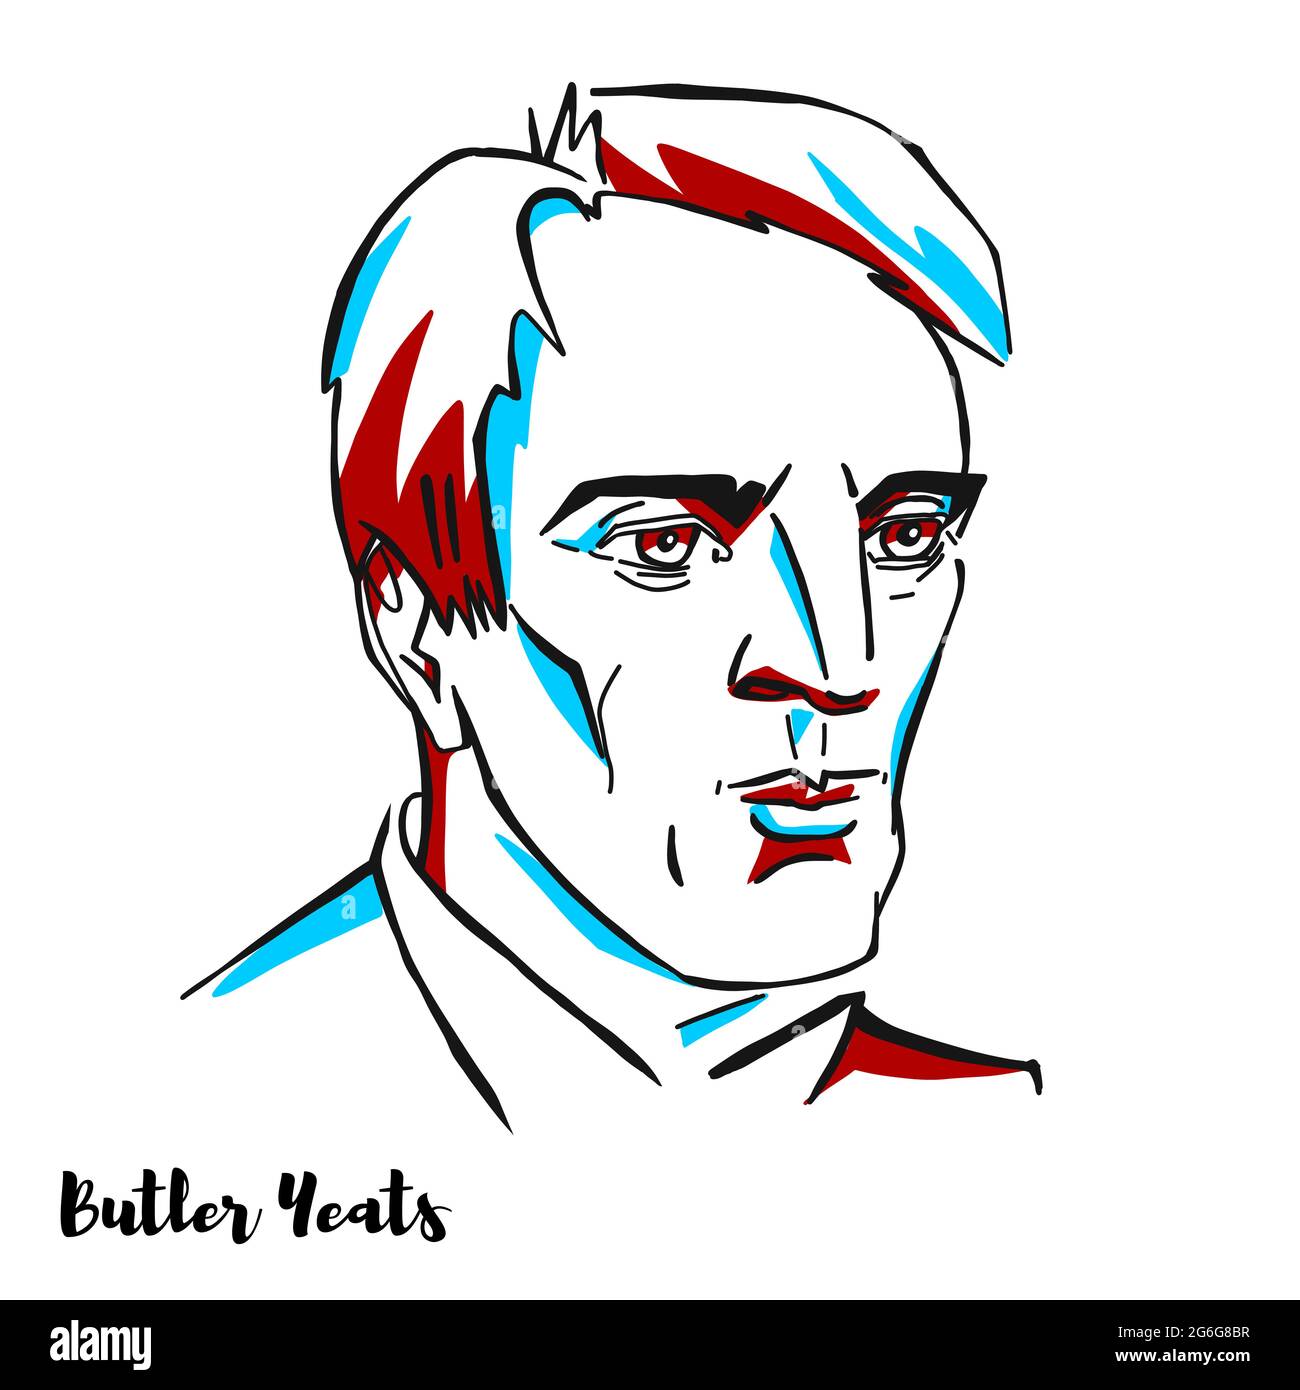 MOSCOW, RUSSIA - DECEMBER 15, 2019: William Butler Yeats engraved vector portrait with ink contours. Irish poet and one of the foremost figures of 20t Stock Vector